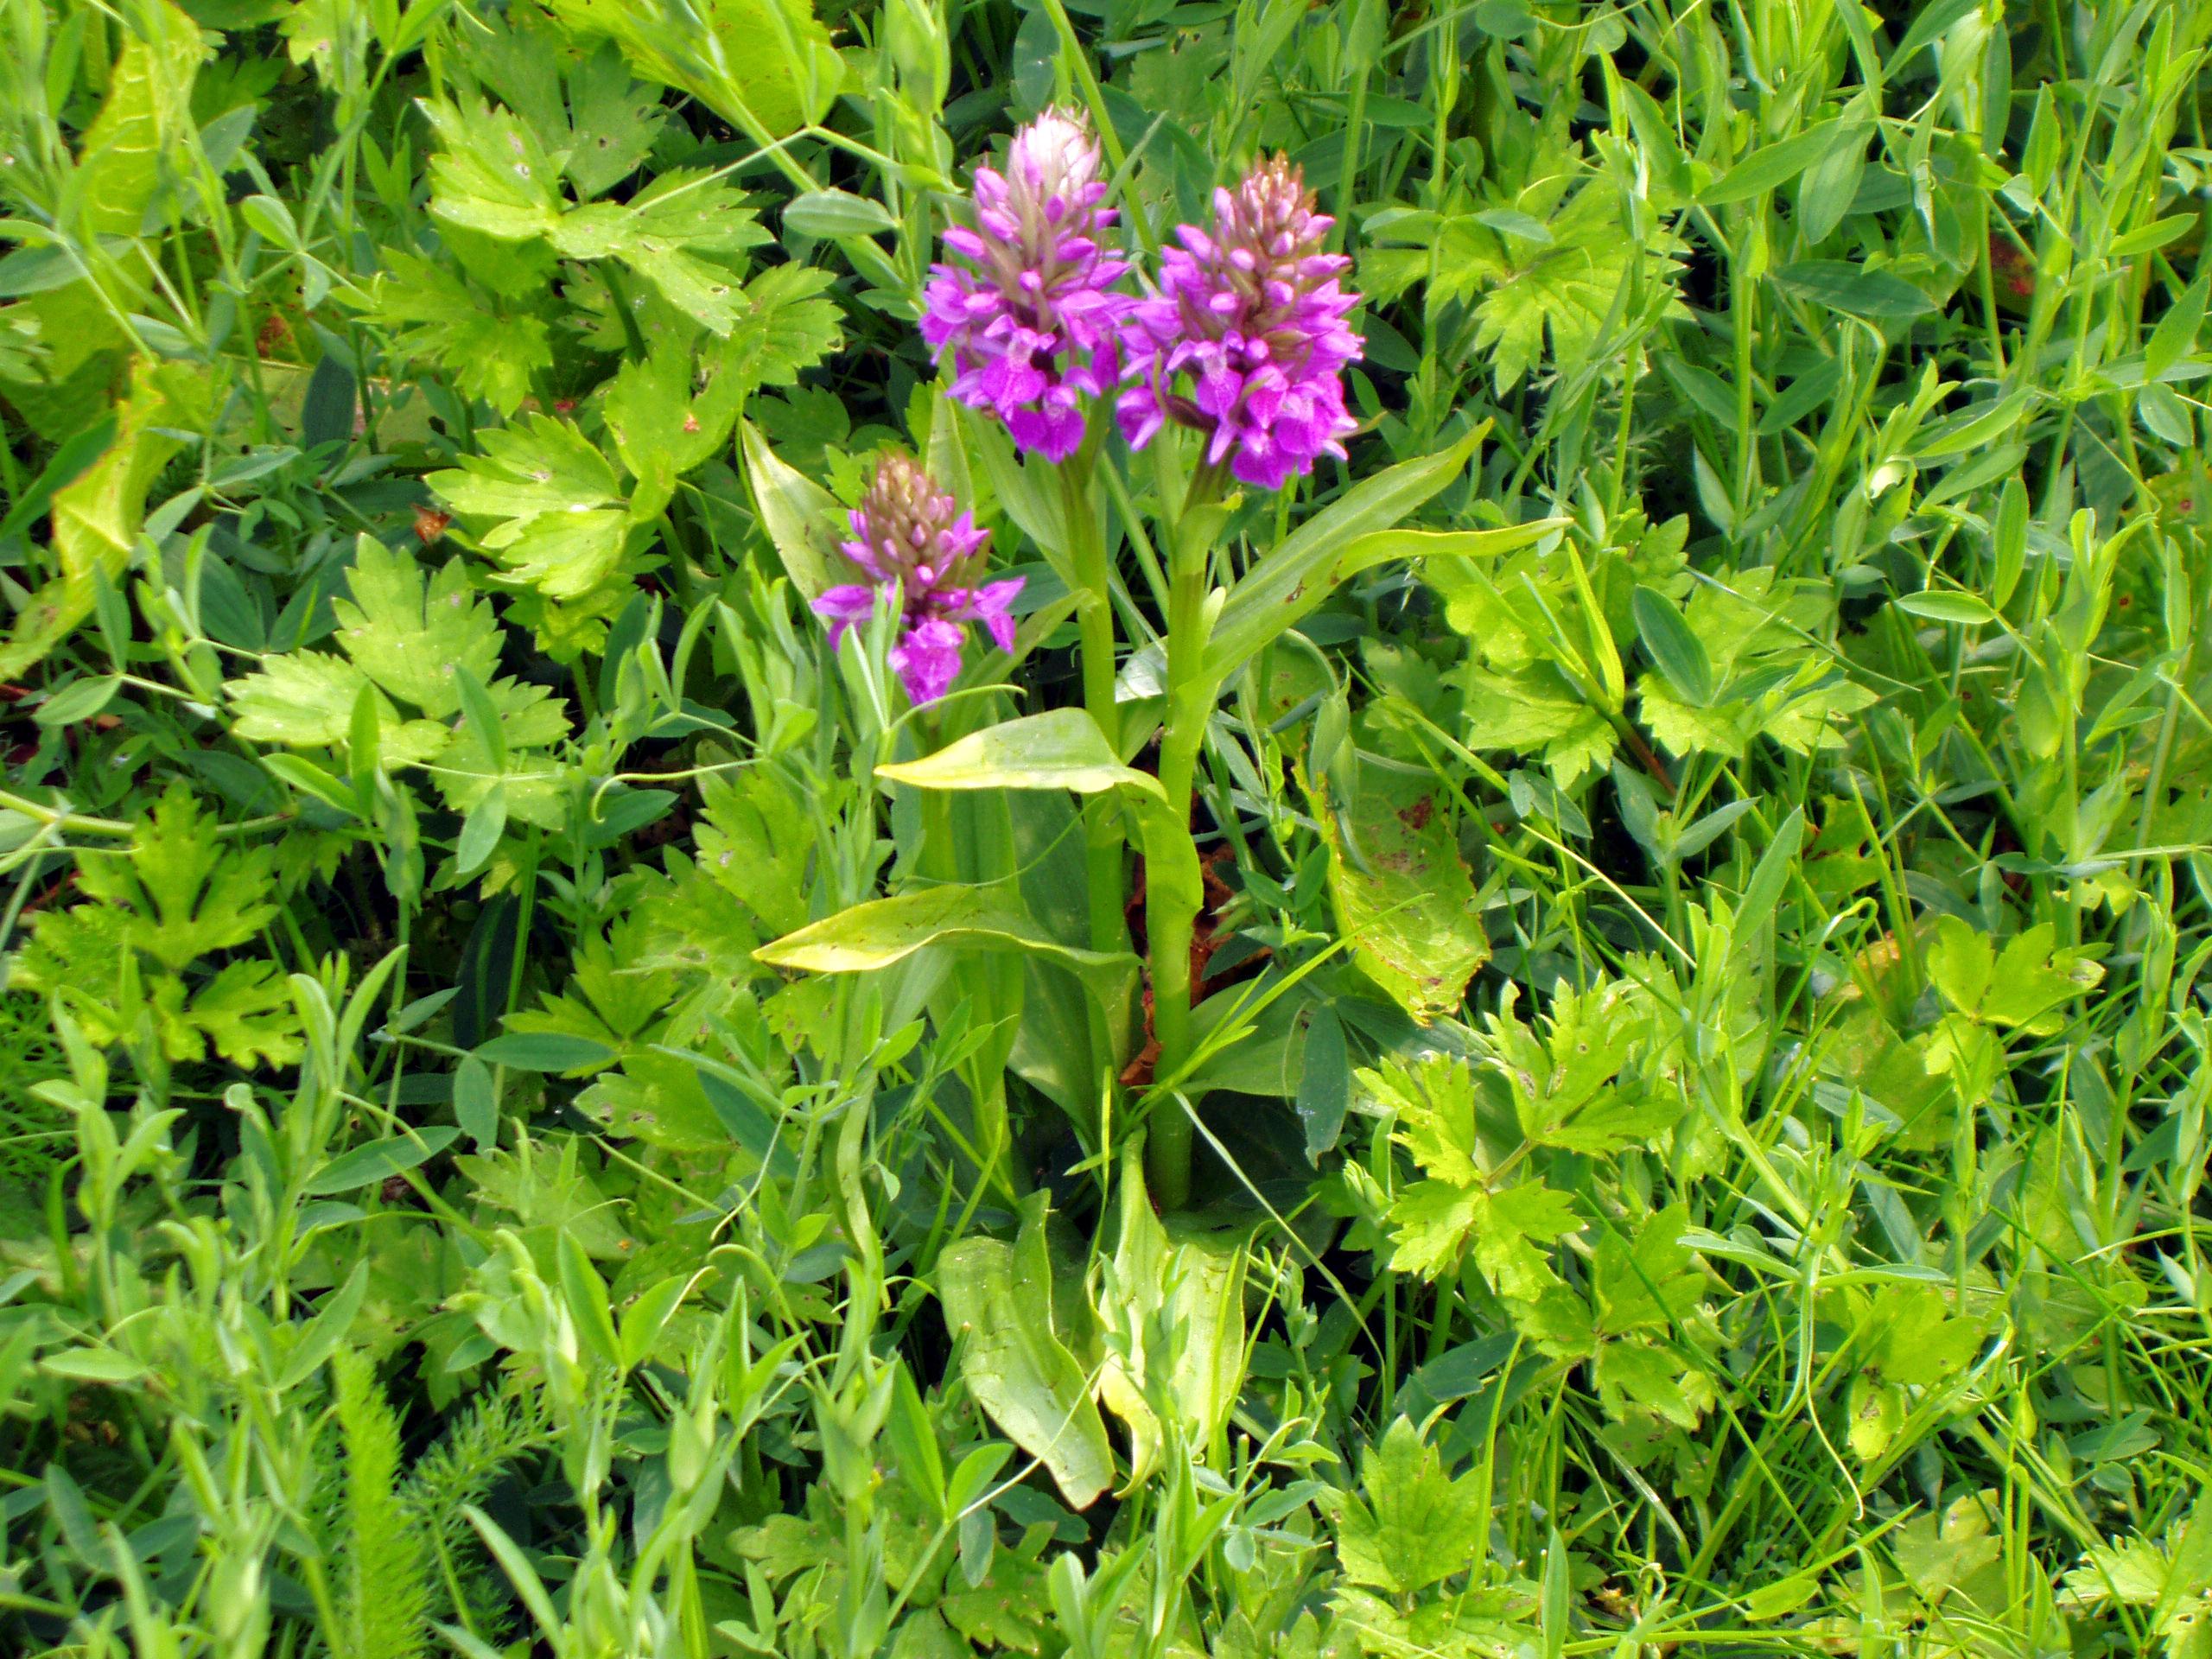 Northern Marsh Orchid flower